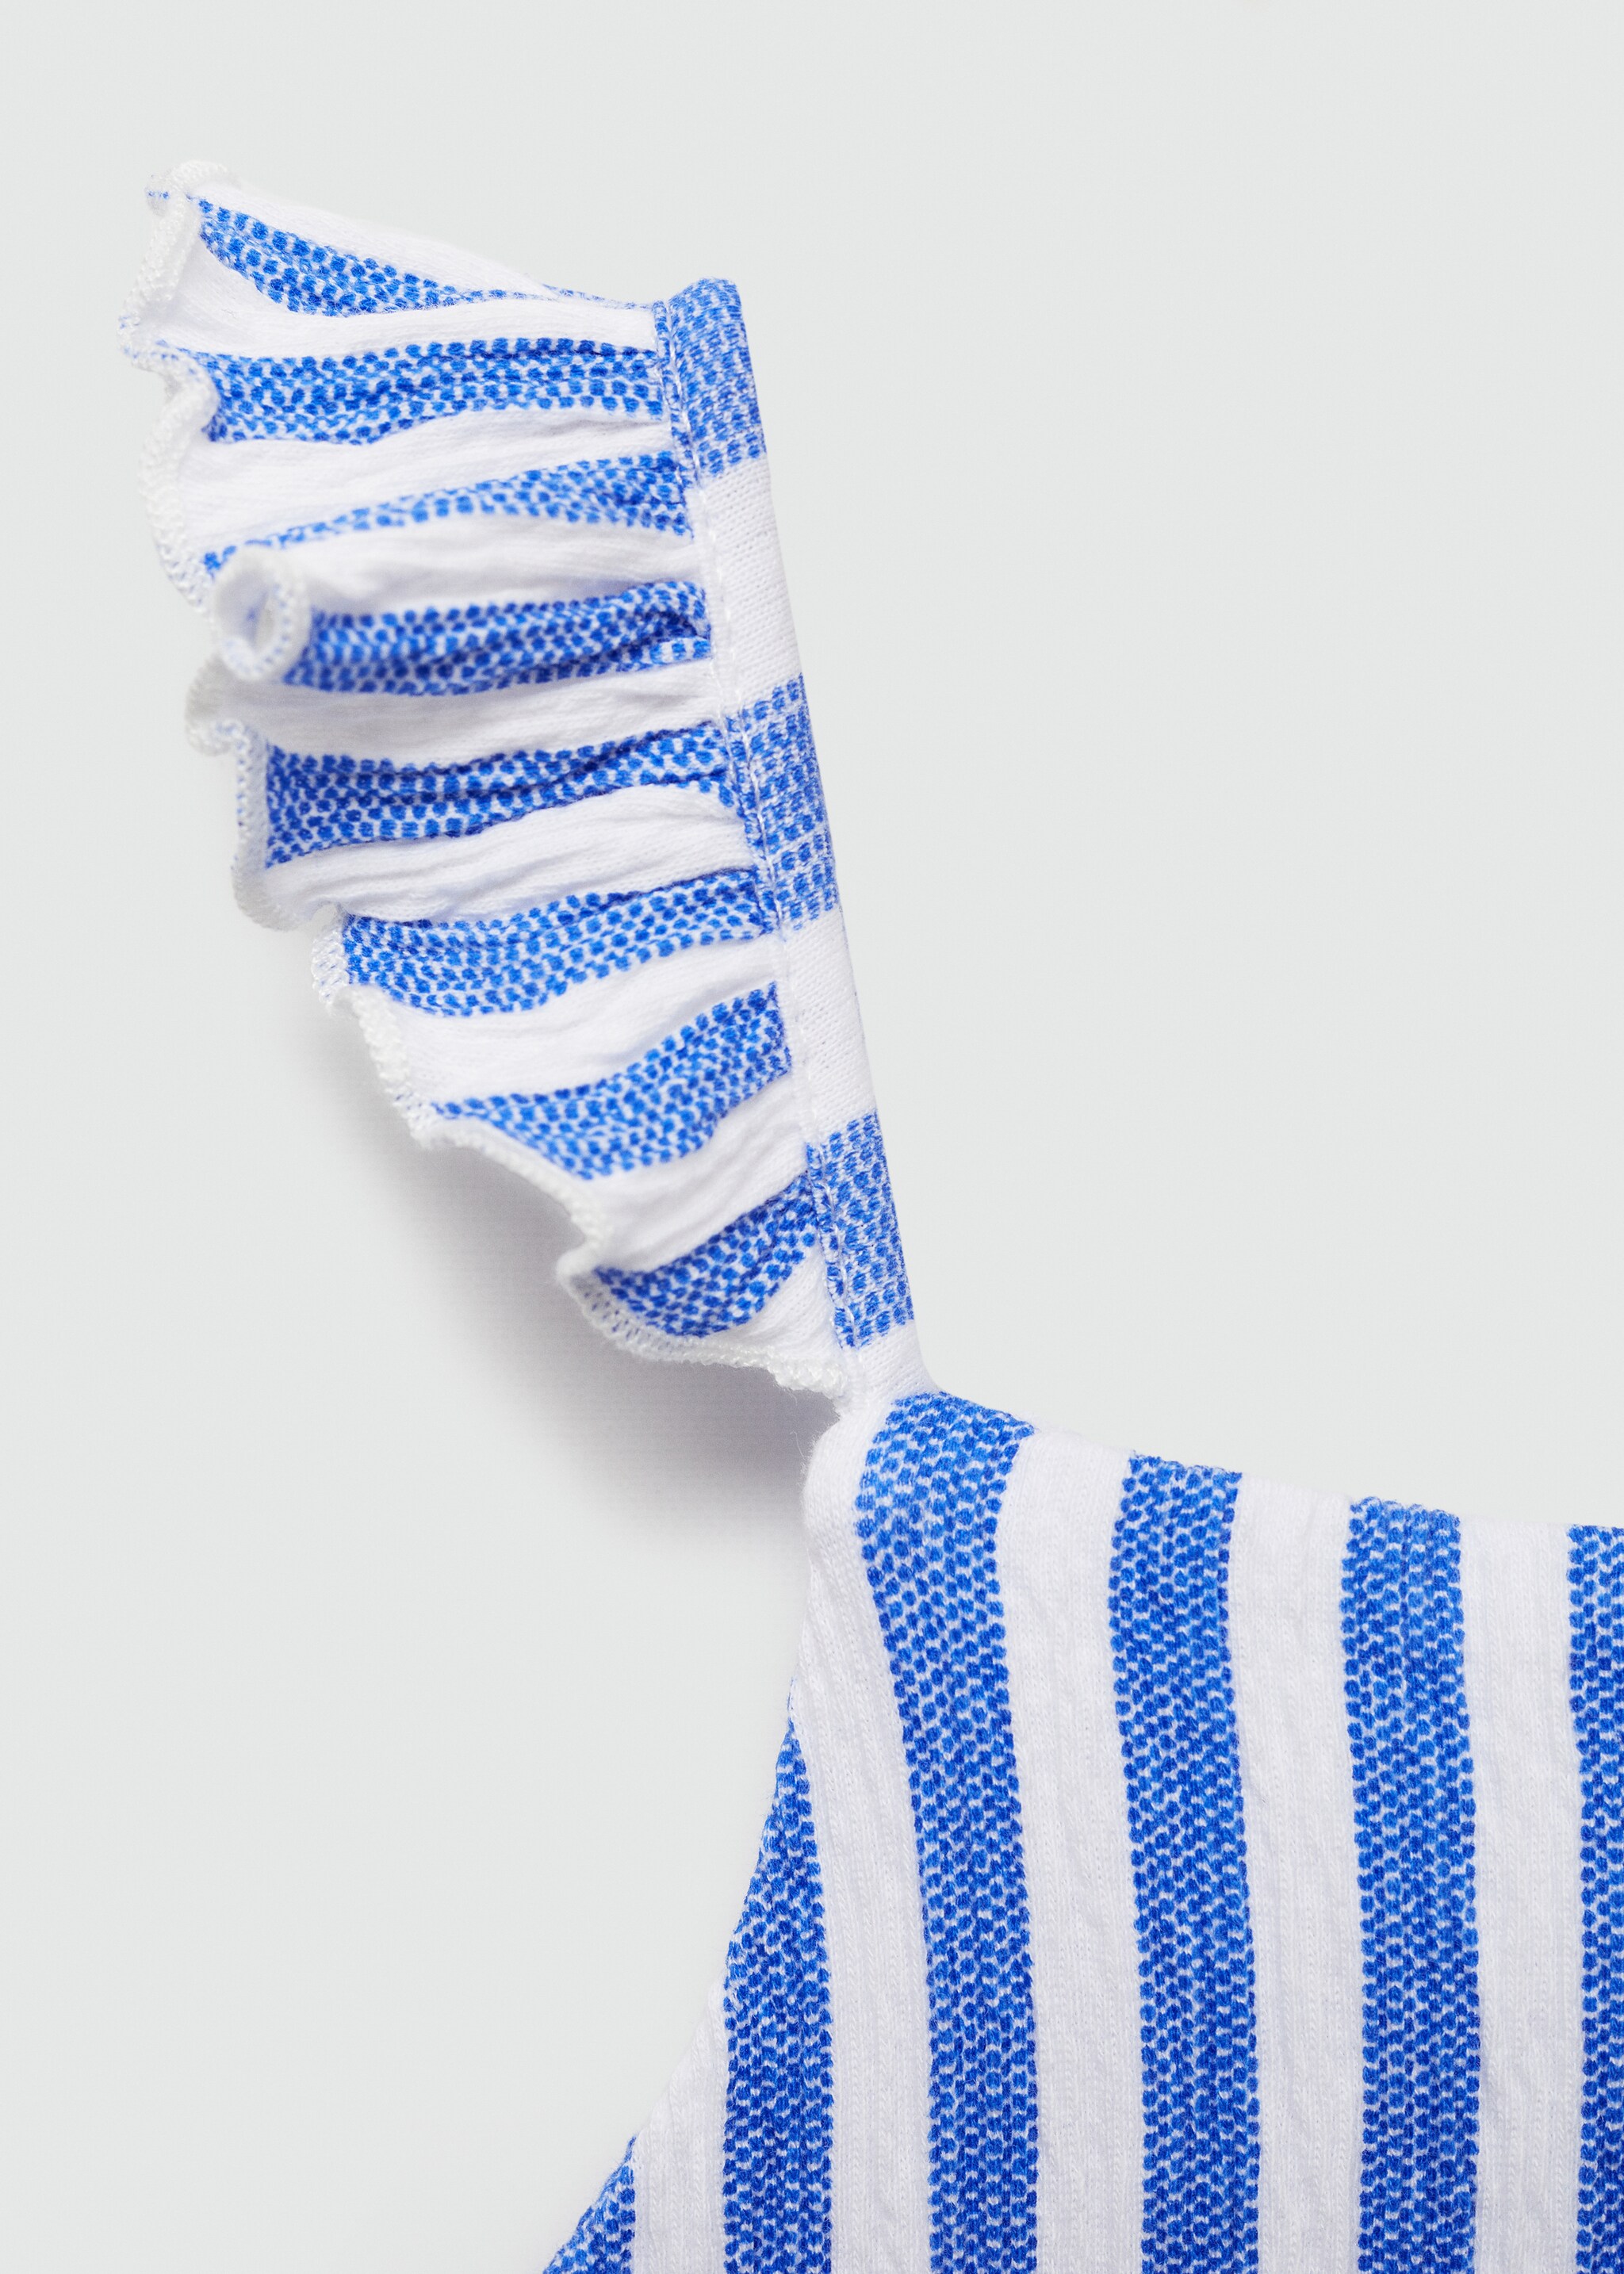 Striped ruffle dress - Details of the article 0